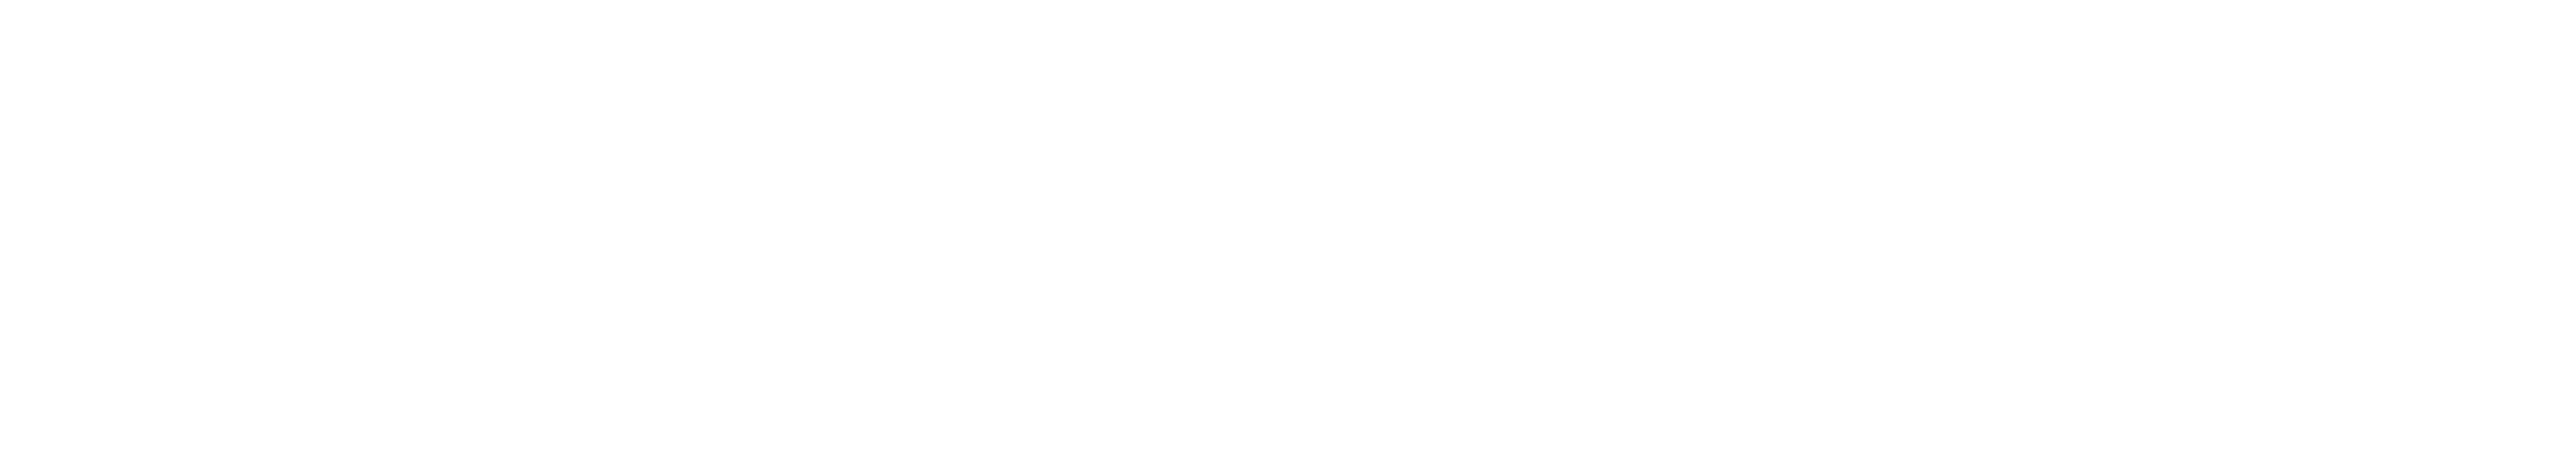 Riviera Business Club - The network for international business people - logo